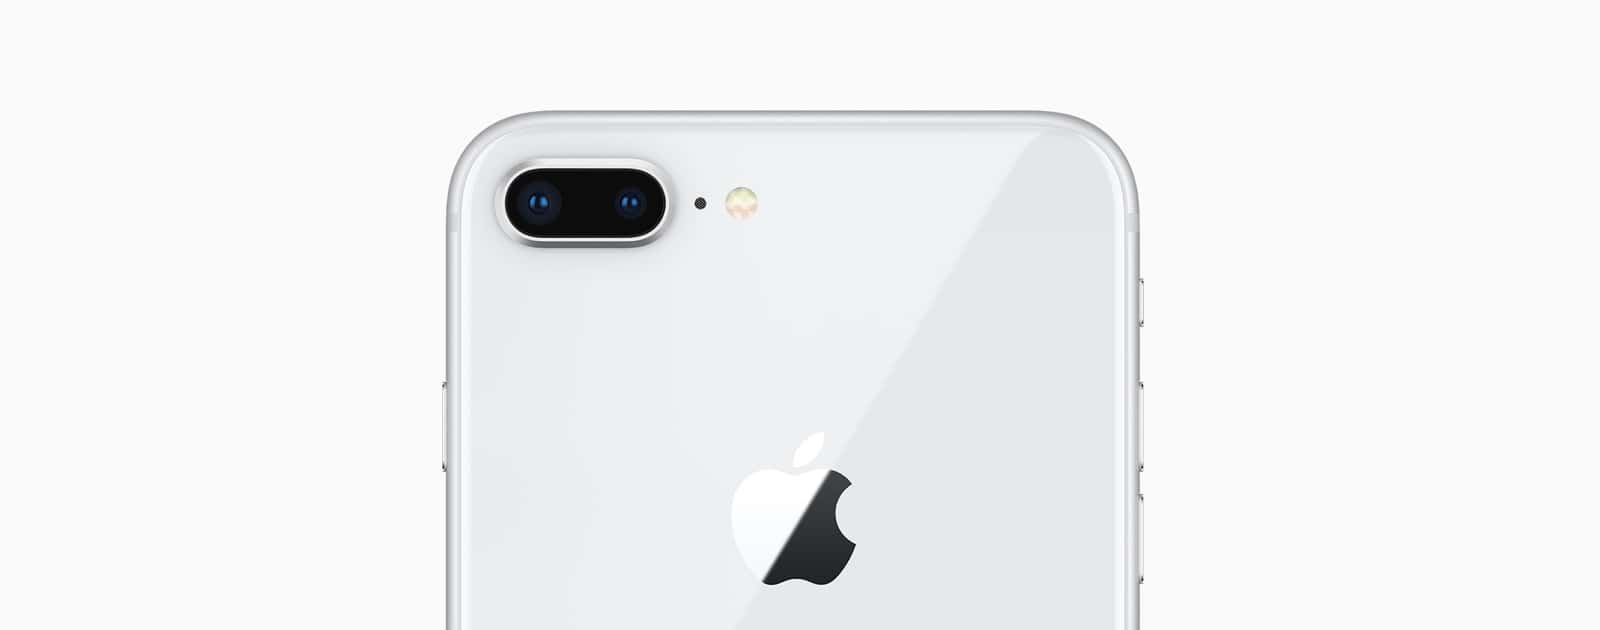 Closer Look at Apple’s Image Chip and Portrait Lighting in New iPhones